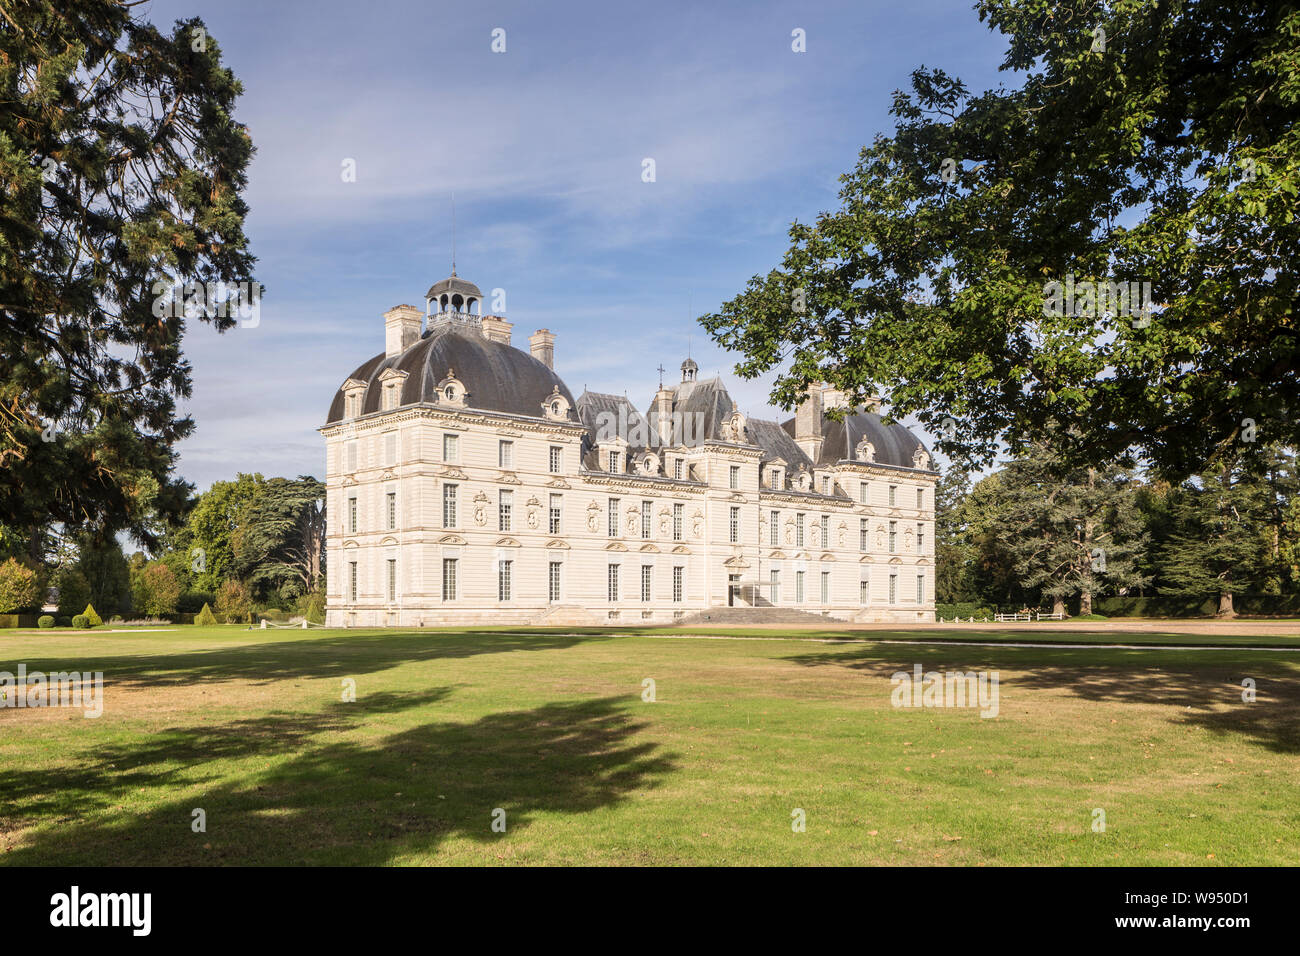 Chateau de Cheverny in the Loire Valley, France. Part of the Chateaux de la Loire, Chateau de Cheverny dates from the early 17th century. The design o Stock Photo